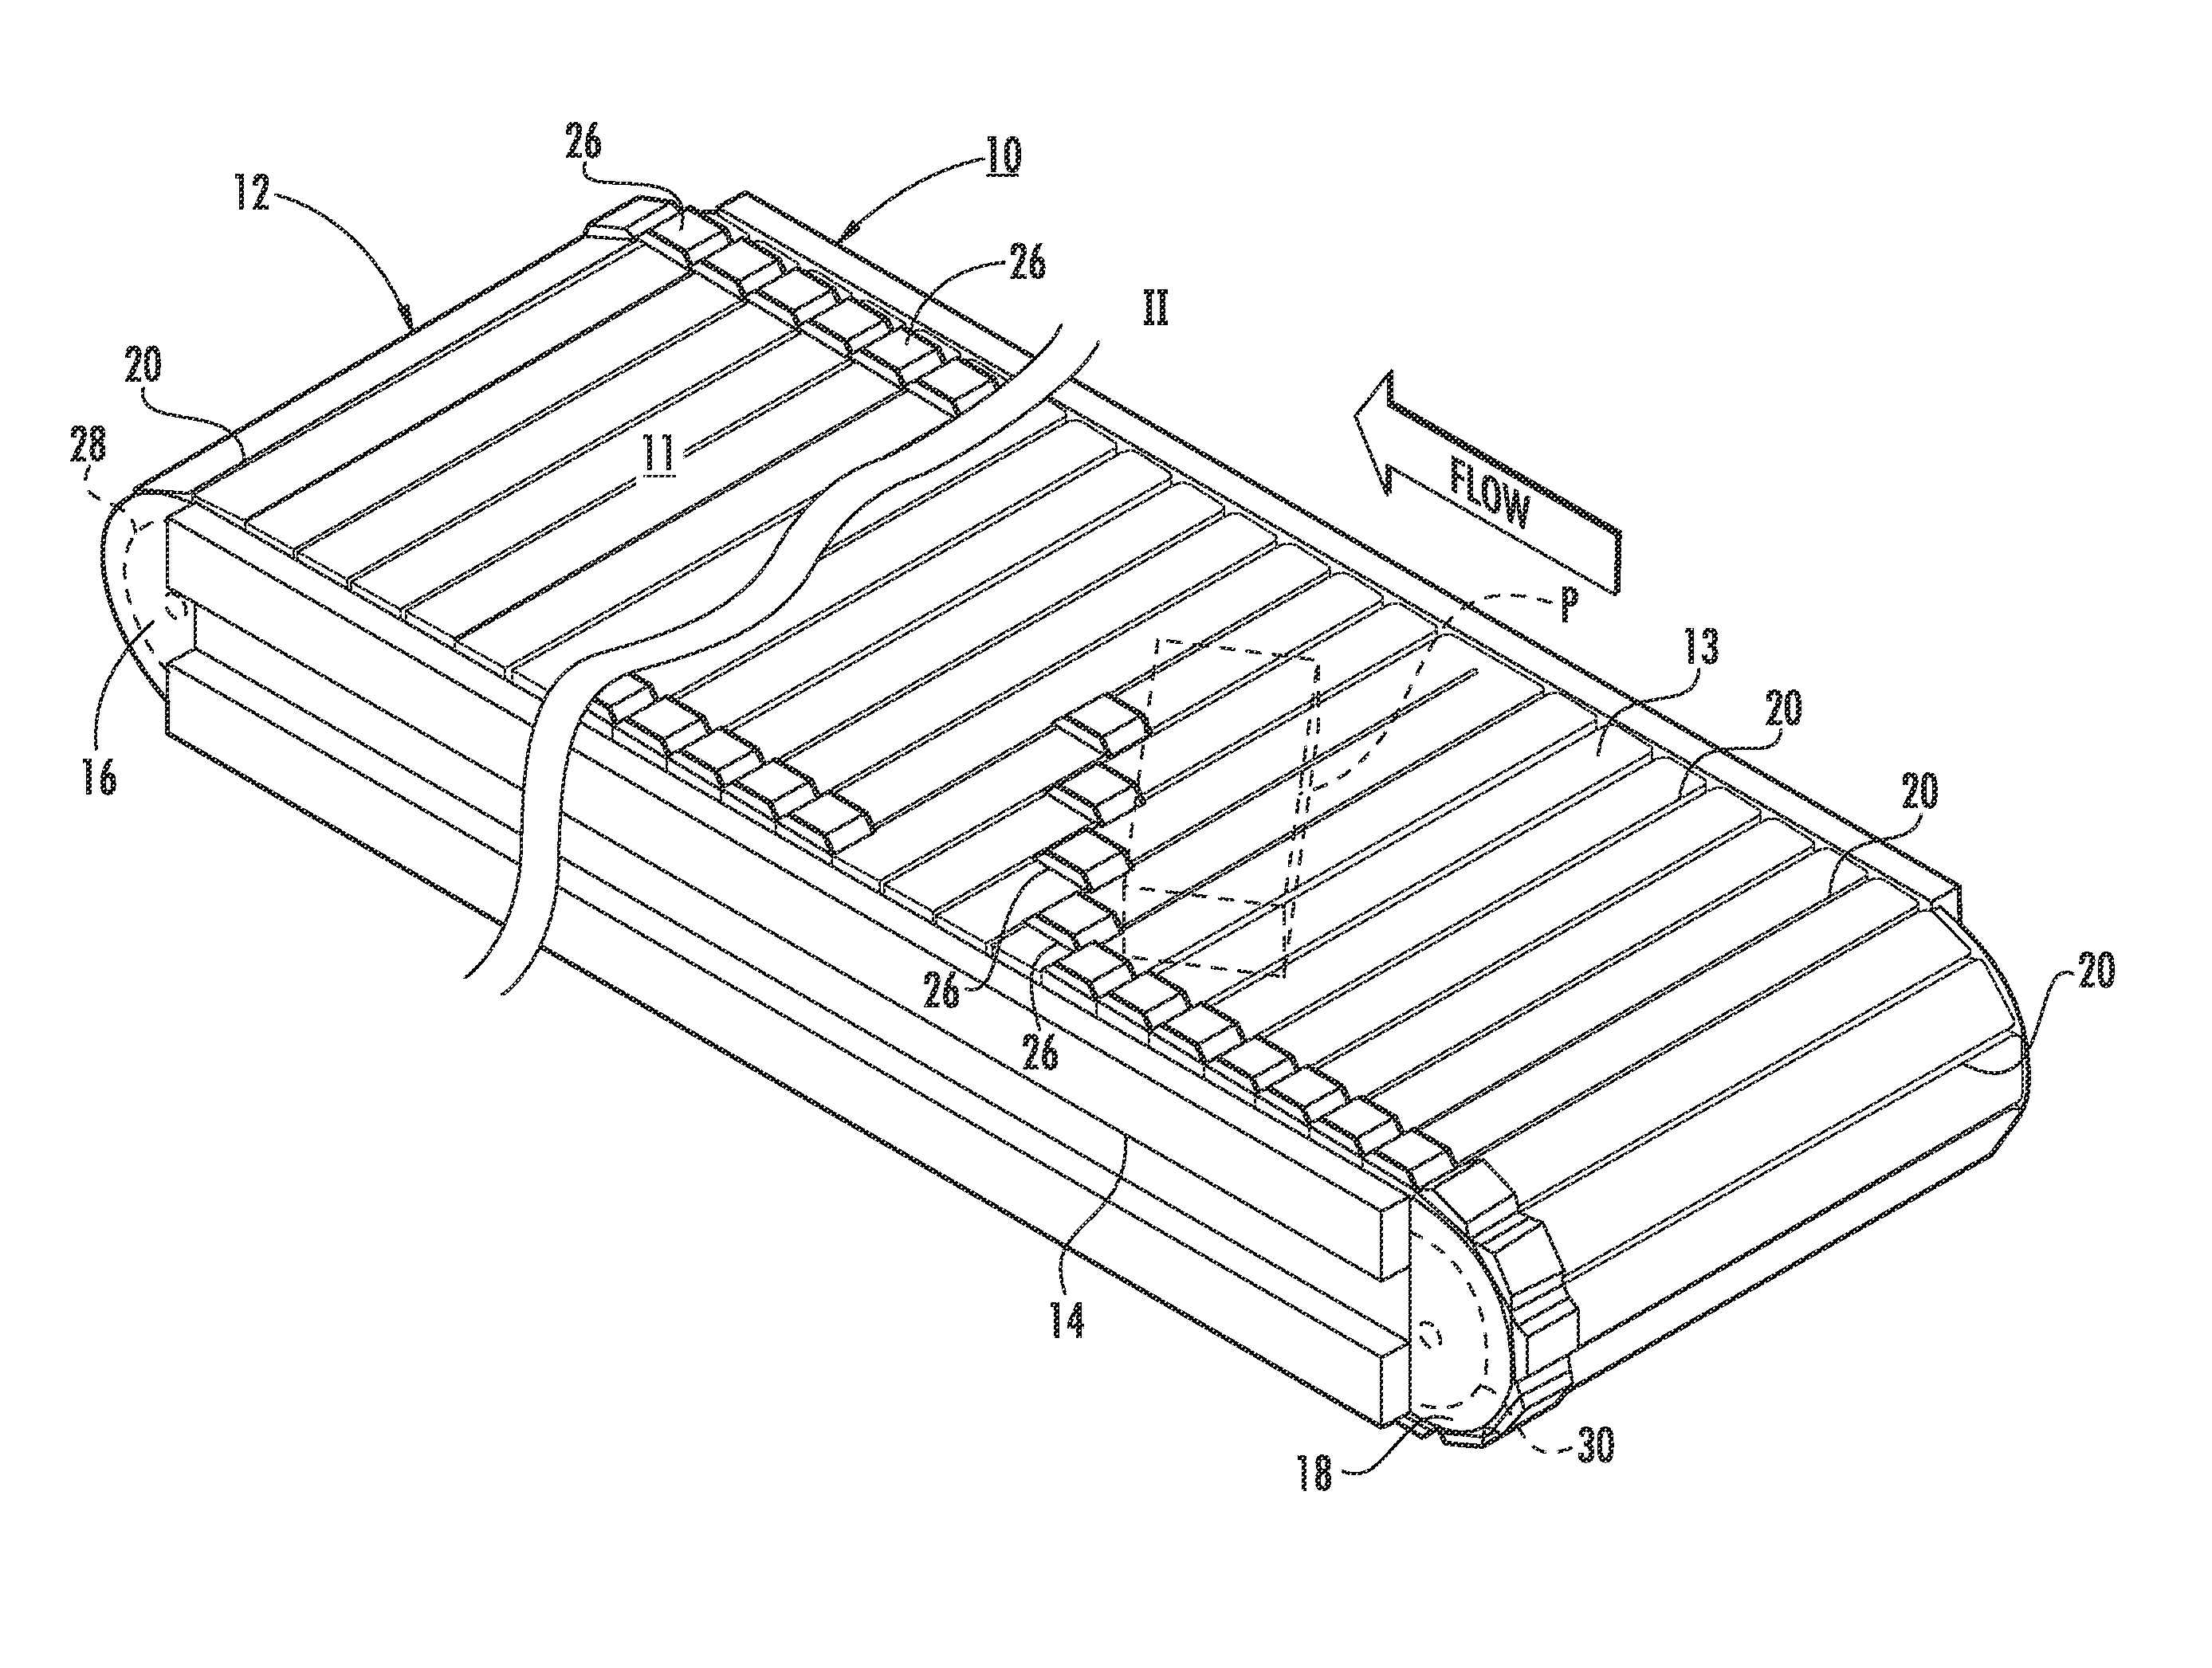 Reducing drag on the web of a positive displacement sorter